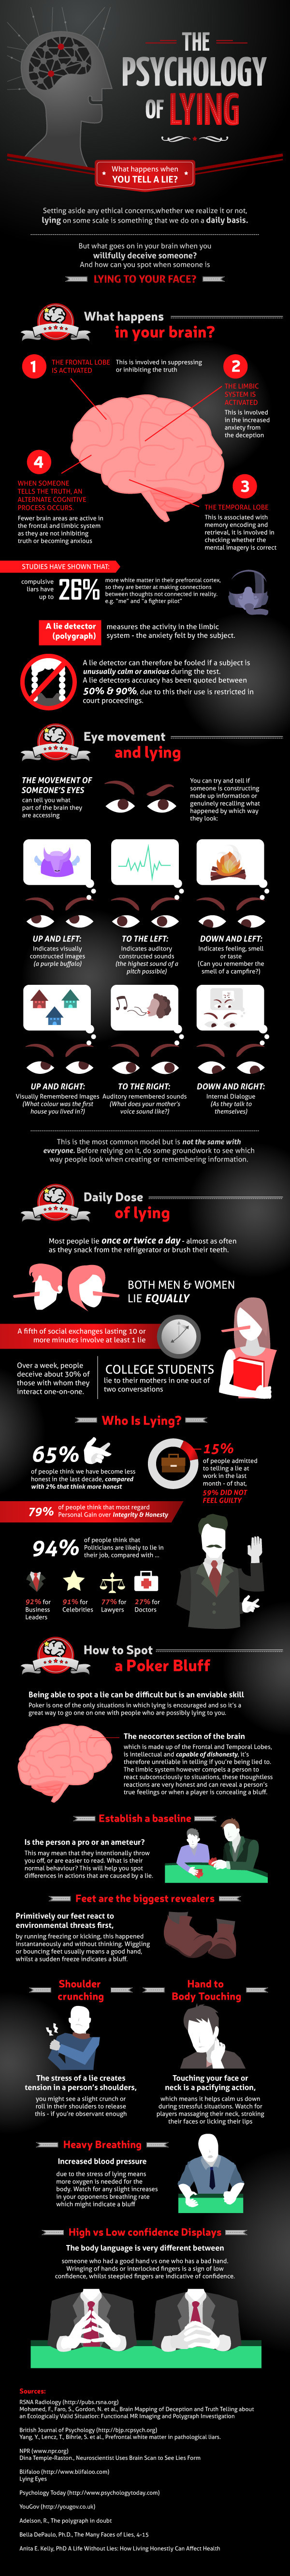 The-Psychology-of-Lying-FINAL-1